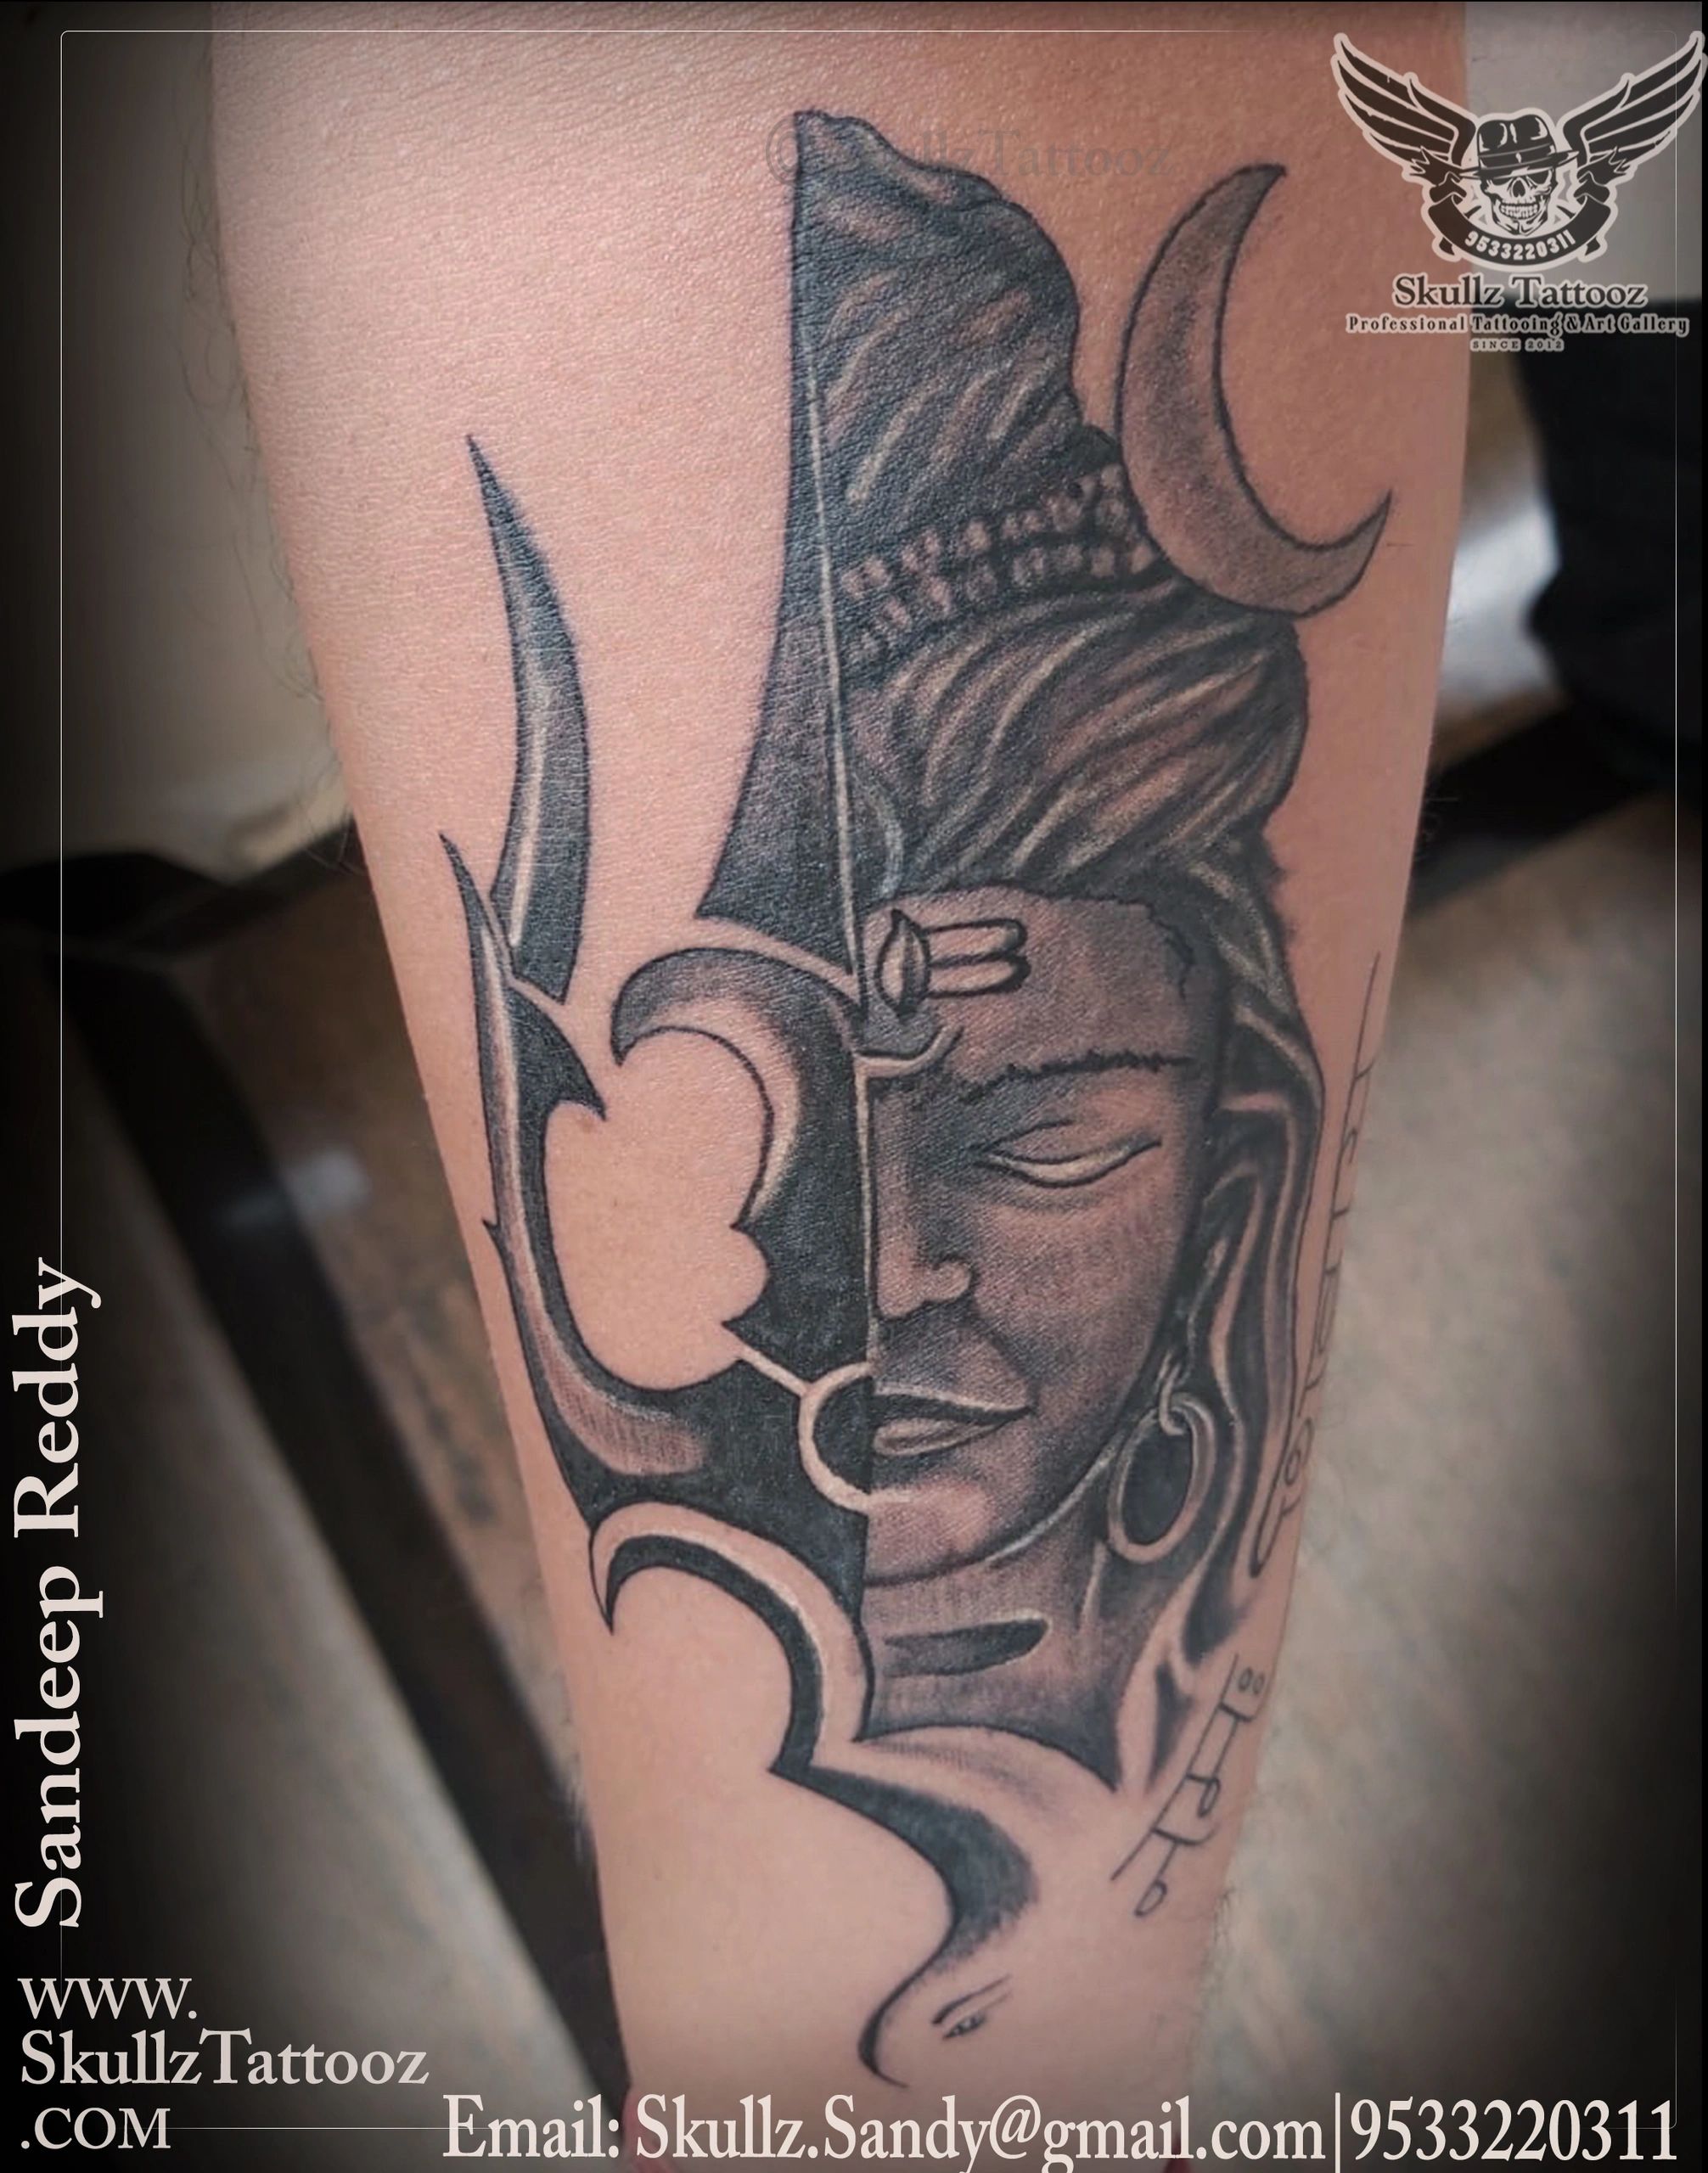 Done with this amazing Customised Lord Shiva armband tattoo by  aakashchandani skinmachinetattoo Lord shiva is healed and settled added  background  By Aakash Chandani  Facebook